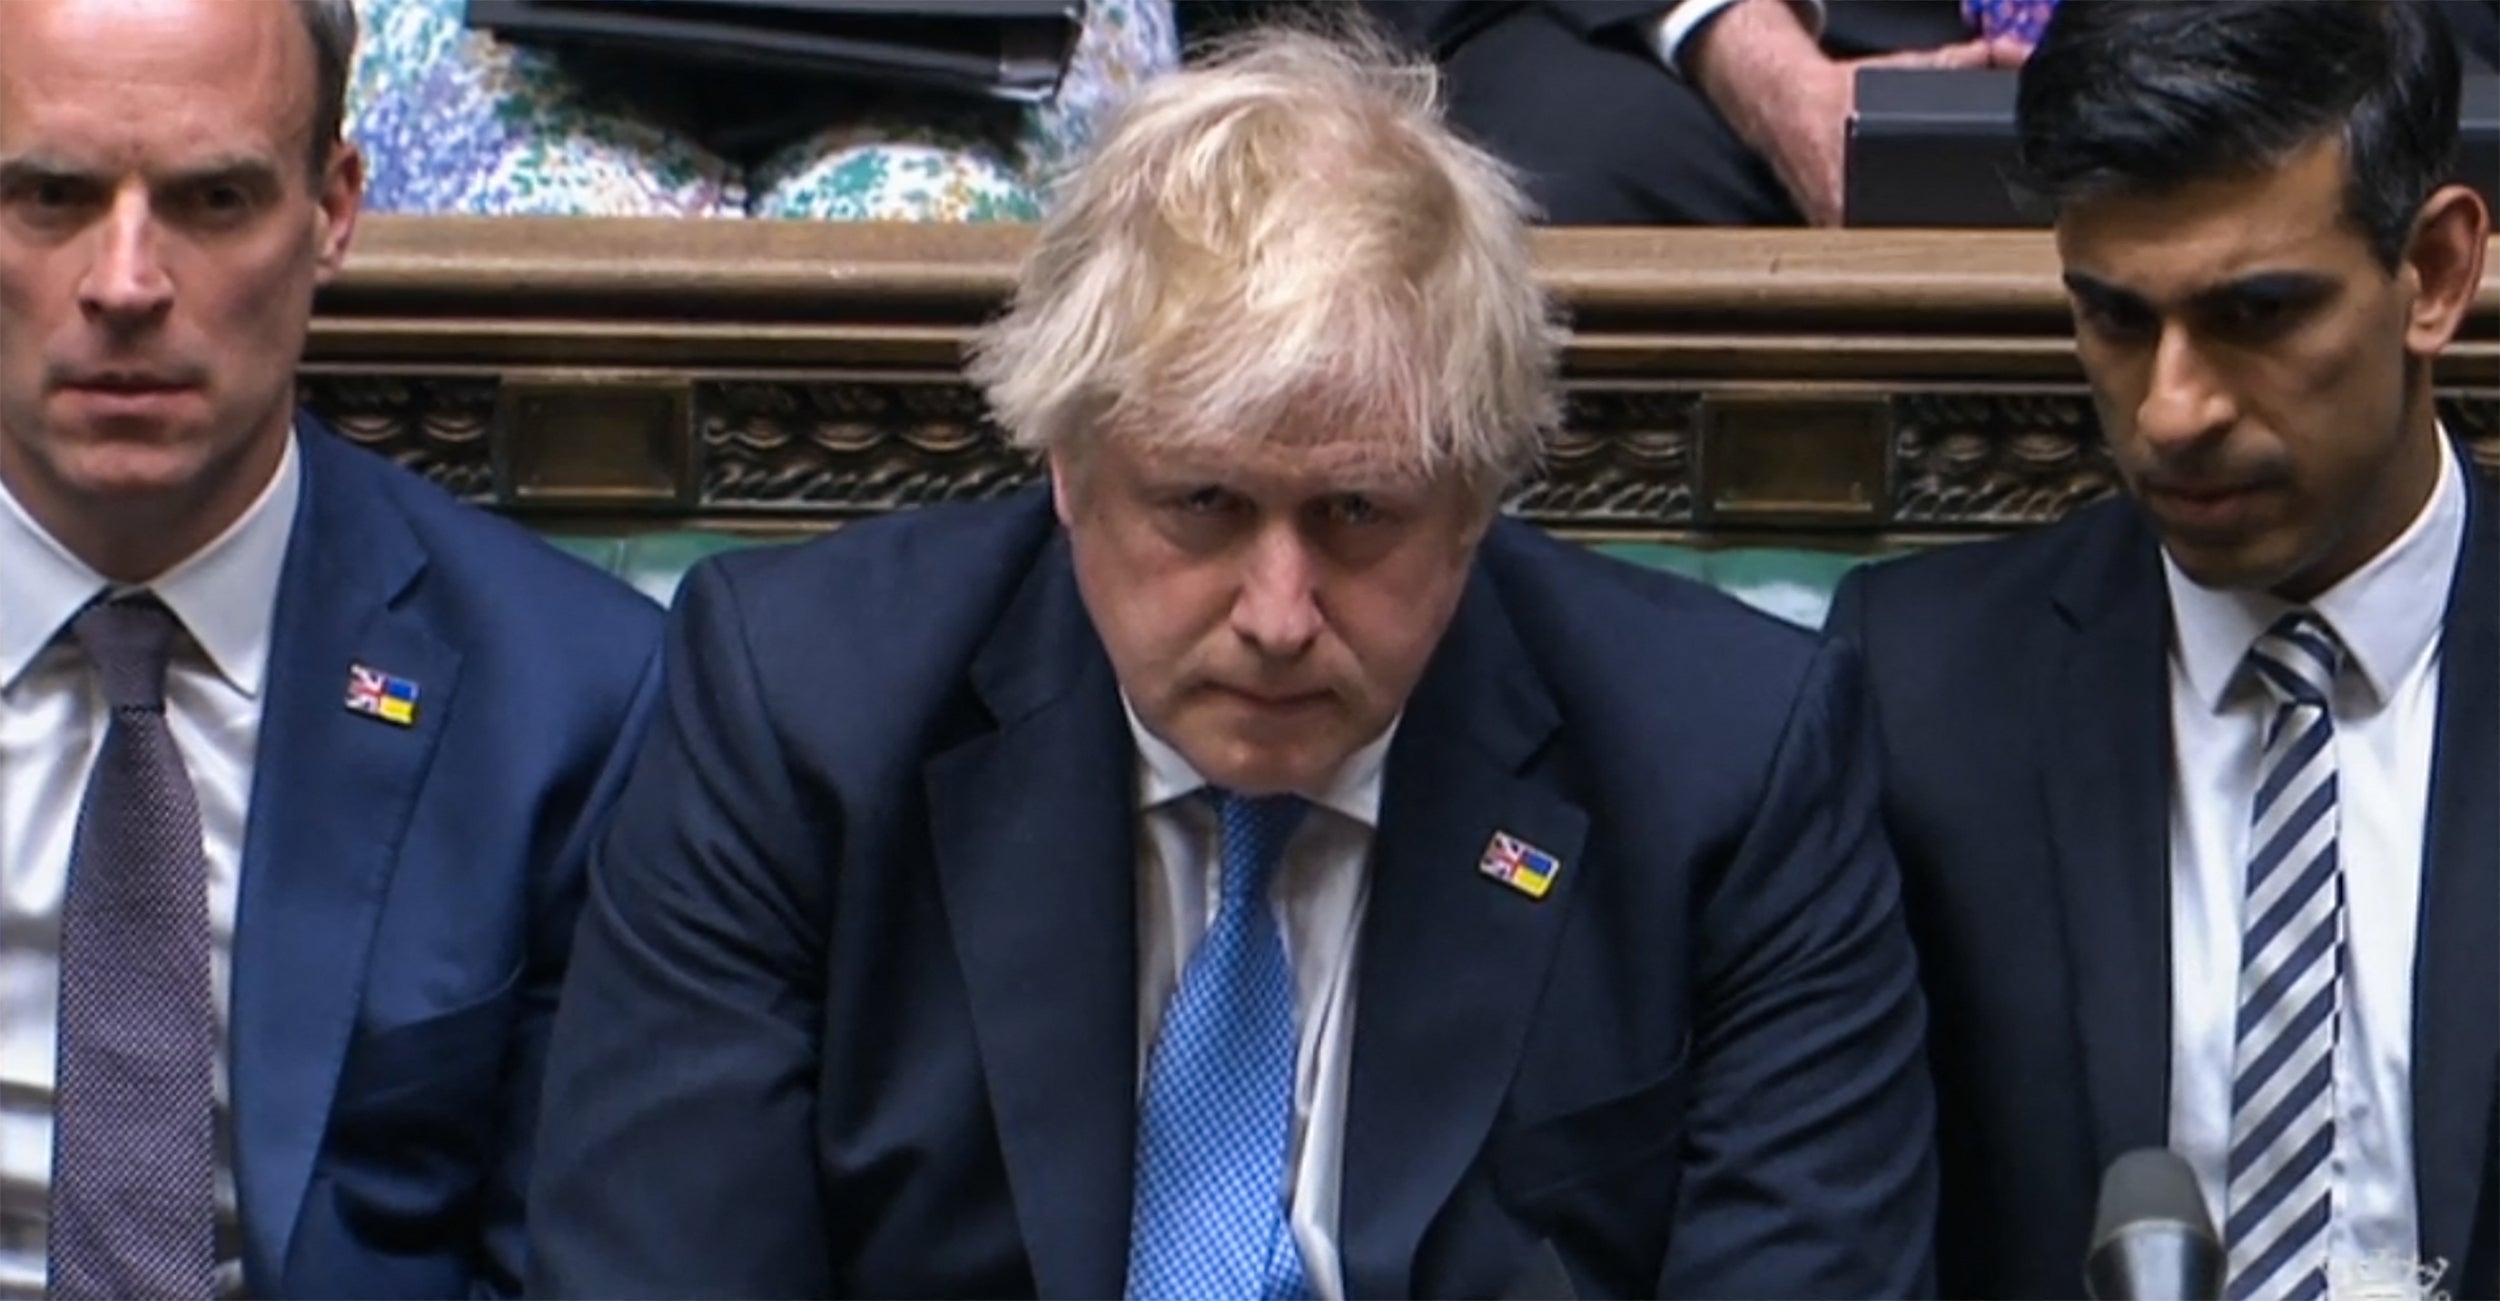 Boris Johnson apologised to the House of Commons on Tuesday – but there’s a vote on Thursday on whether he should be investigated for misleading parliament